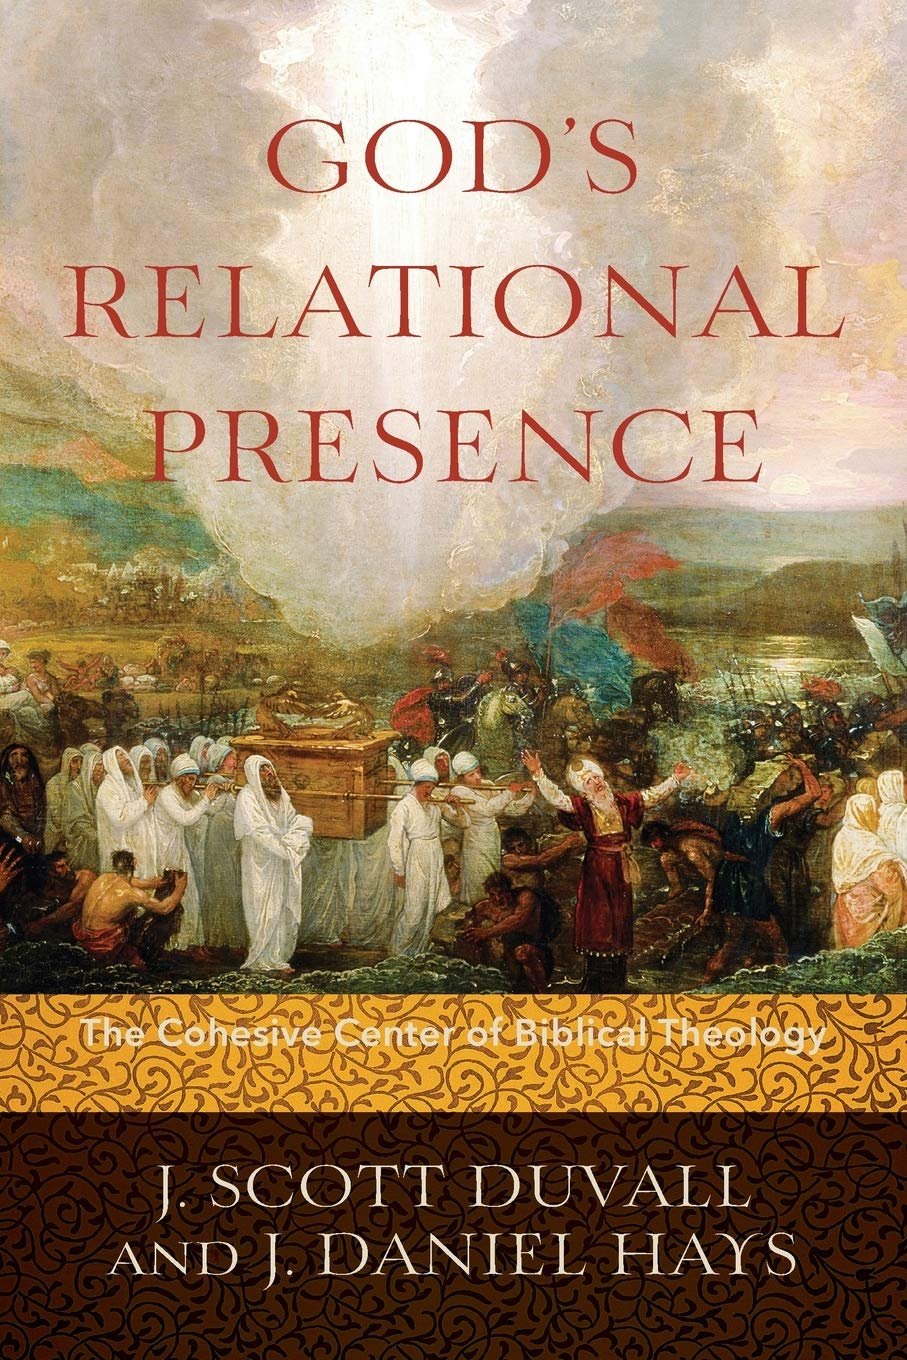 God's Relational Presence: The Cohesive Center of Biblical Theology